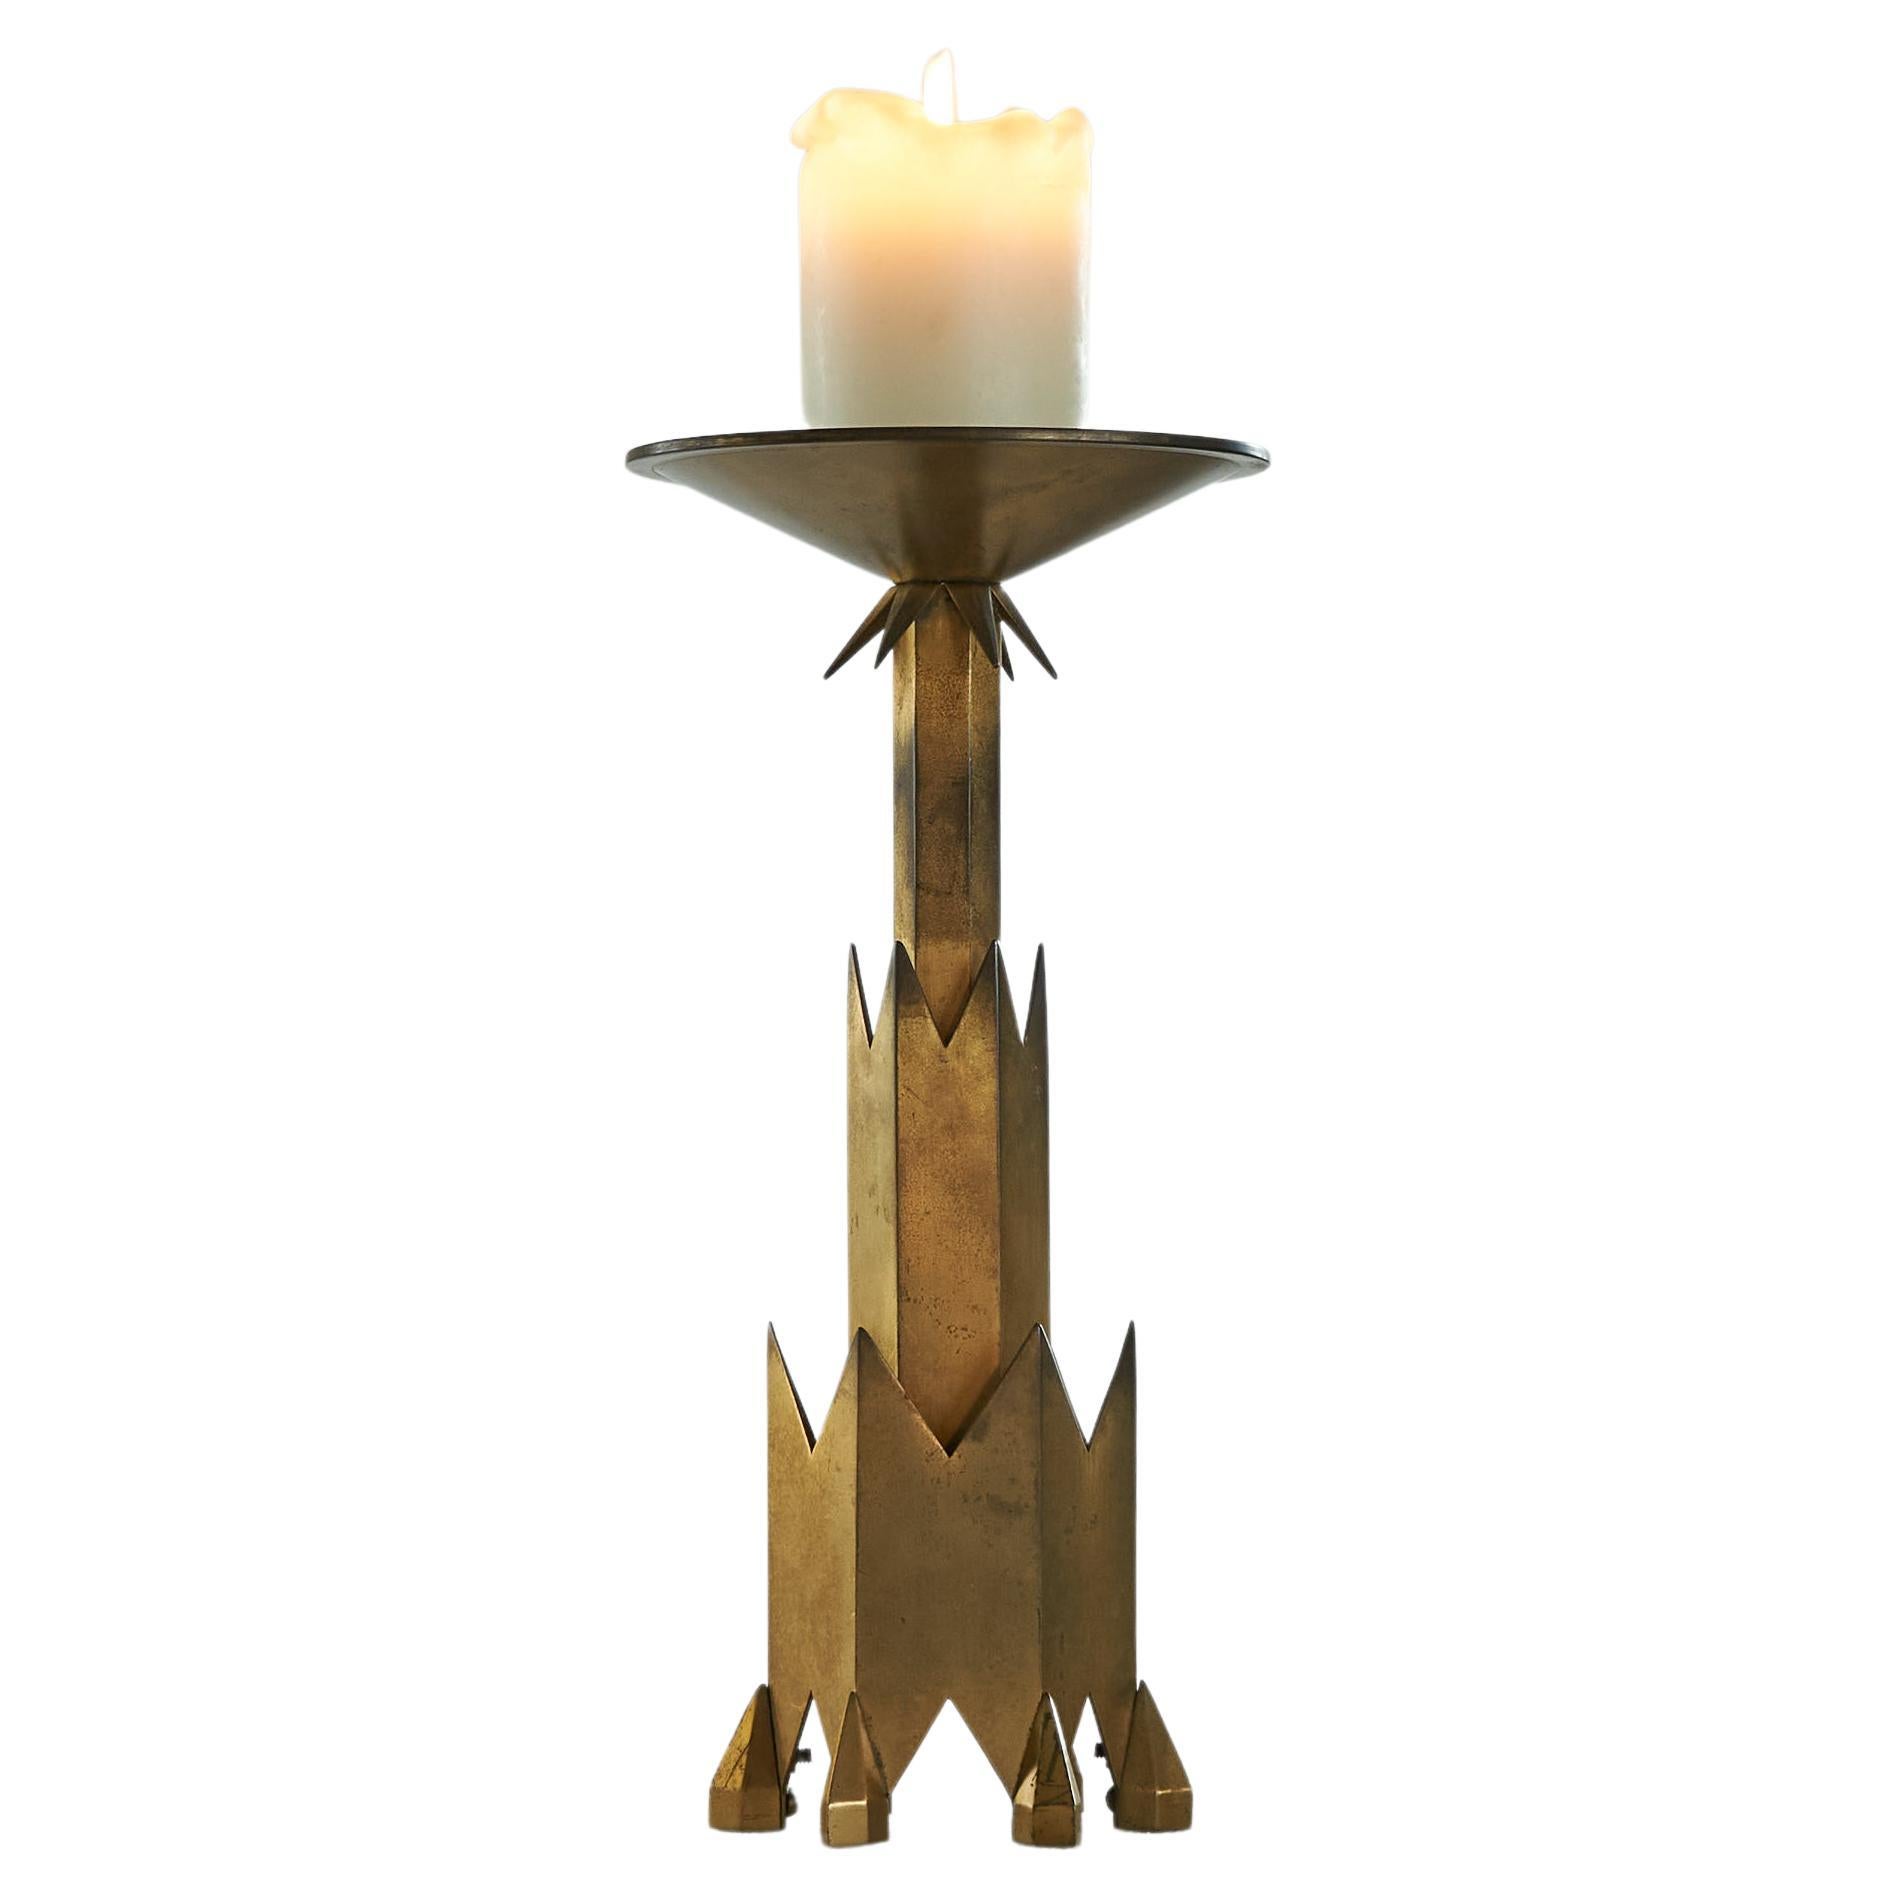 Remarkable Art Deco Candle Holder in Brass